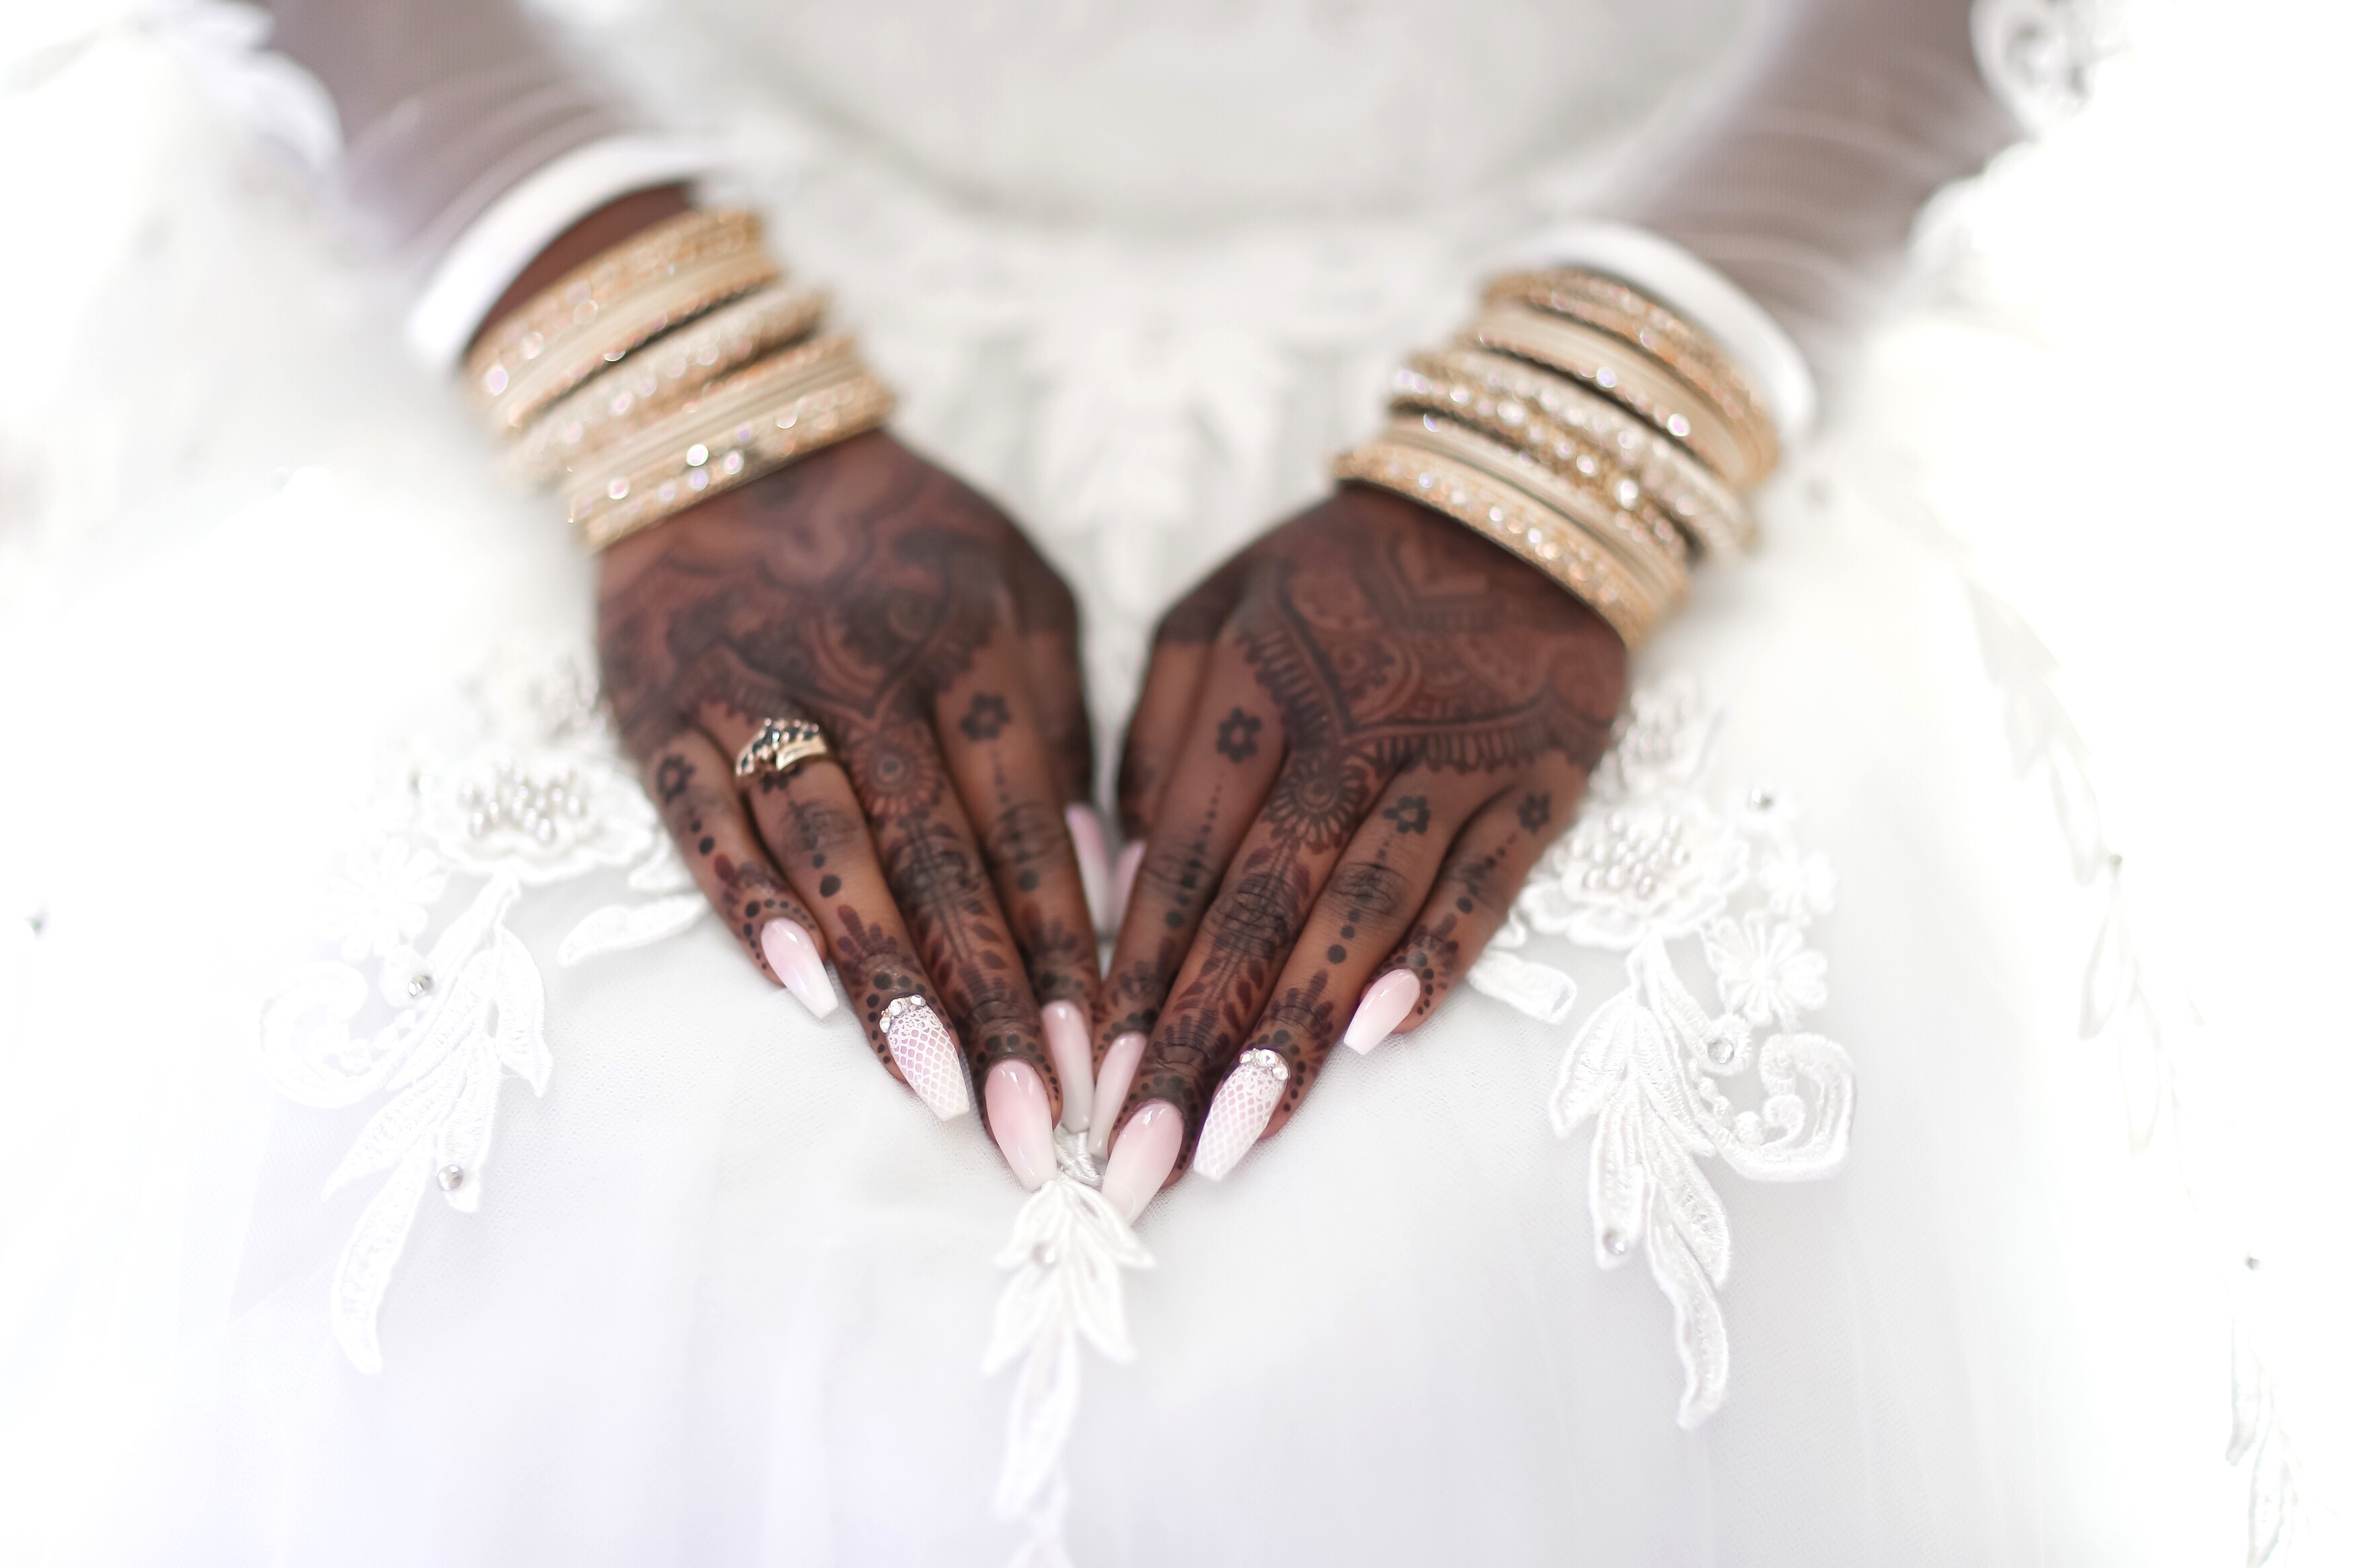 The white wedding dress and henna. Do they go together?